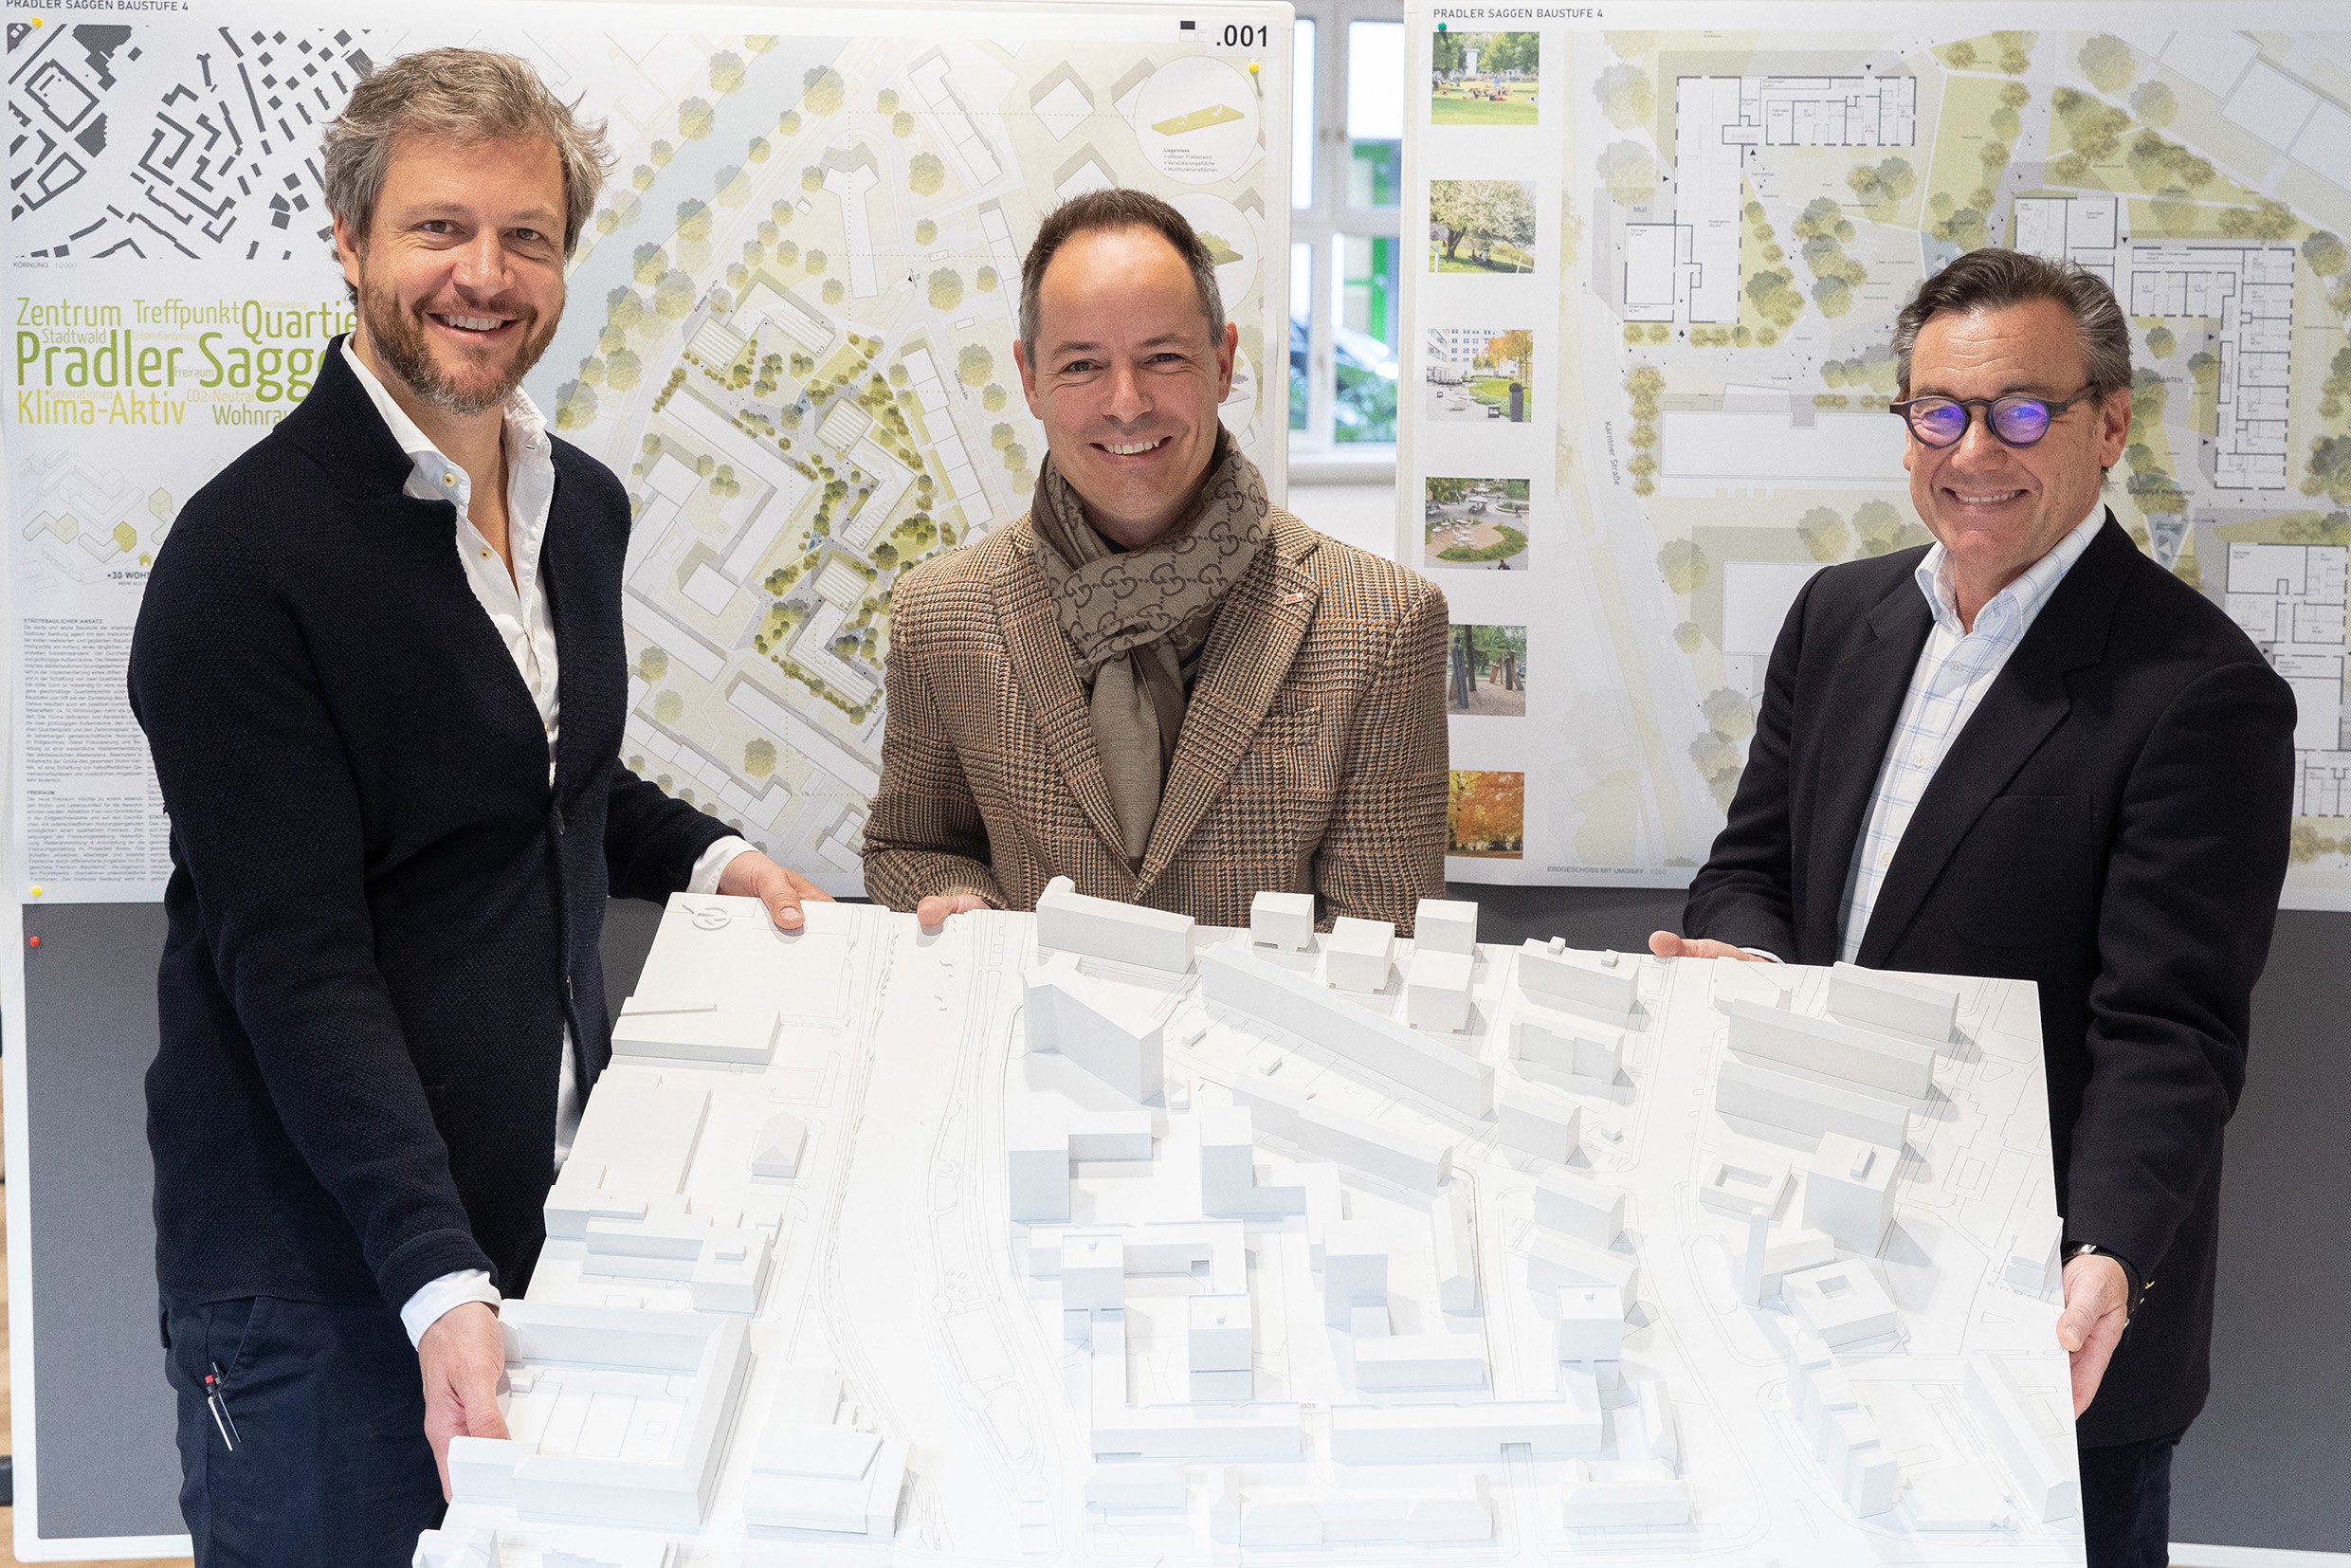 From left: Paul Ohnmacht, ATP Innsbruck, with Deputy Mayor Markus Lassenberger and NHT-Managing Director Markus Pollo, presenting the winning project. Photo: NHT/Forcher<br><span class='image_copyright'>NHT/Forcher</span><br>